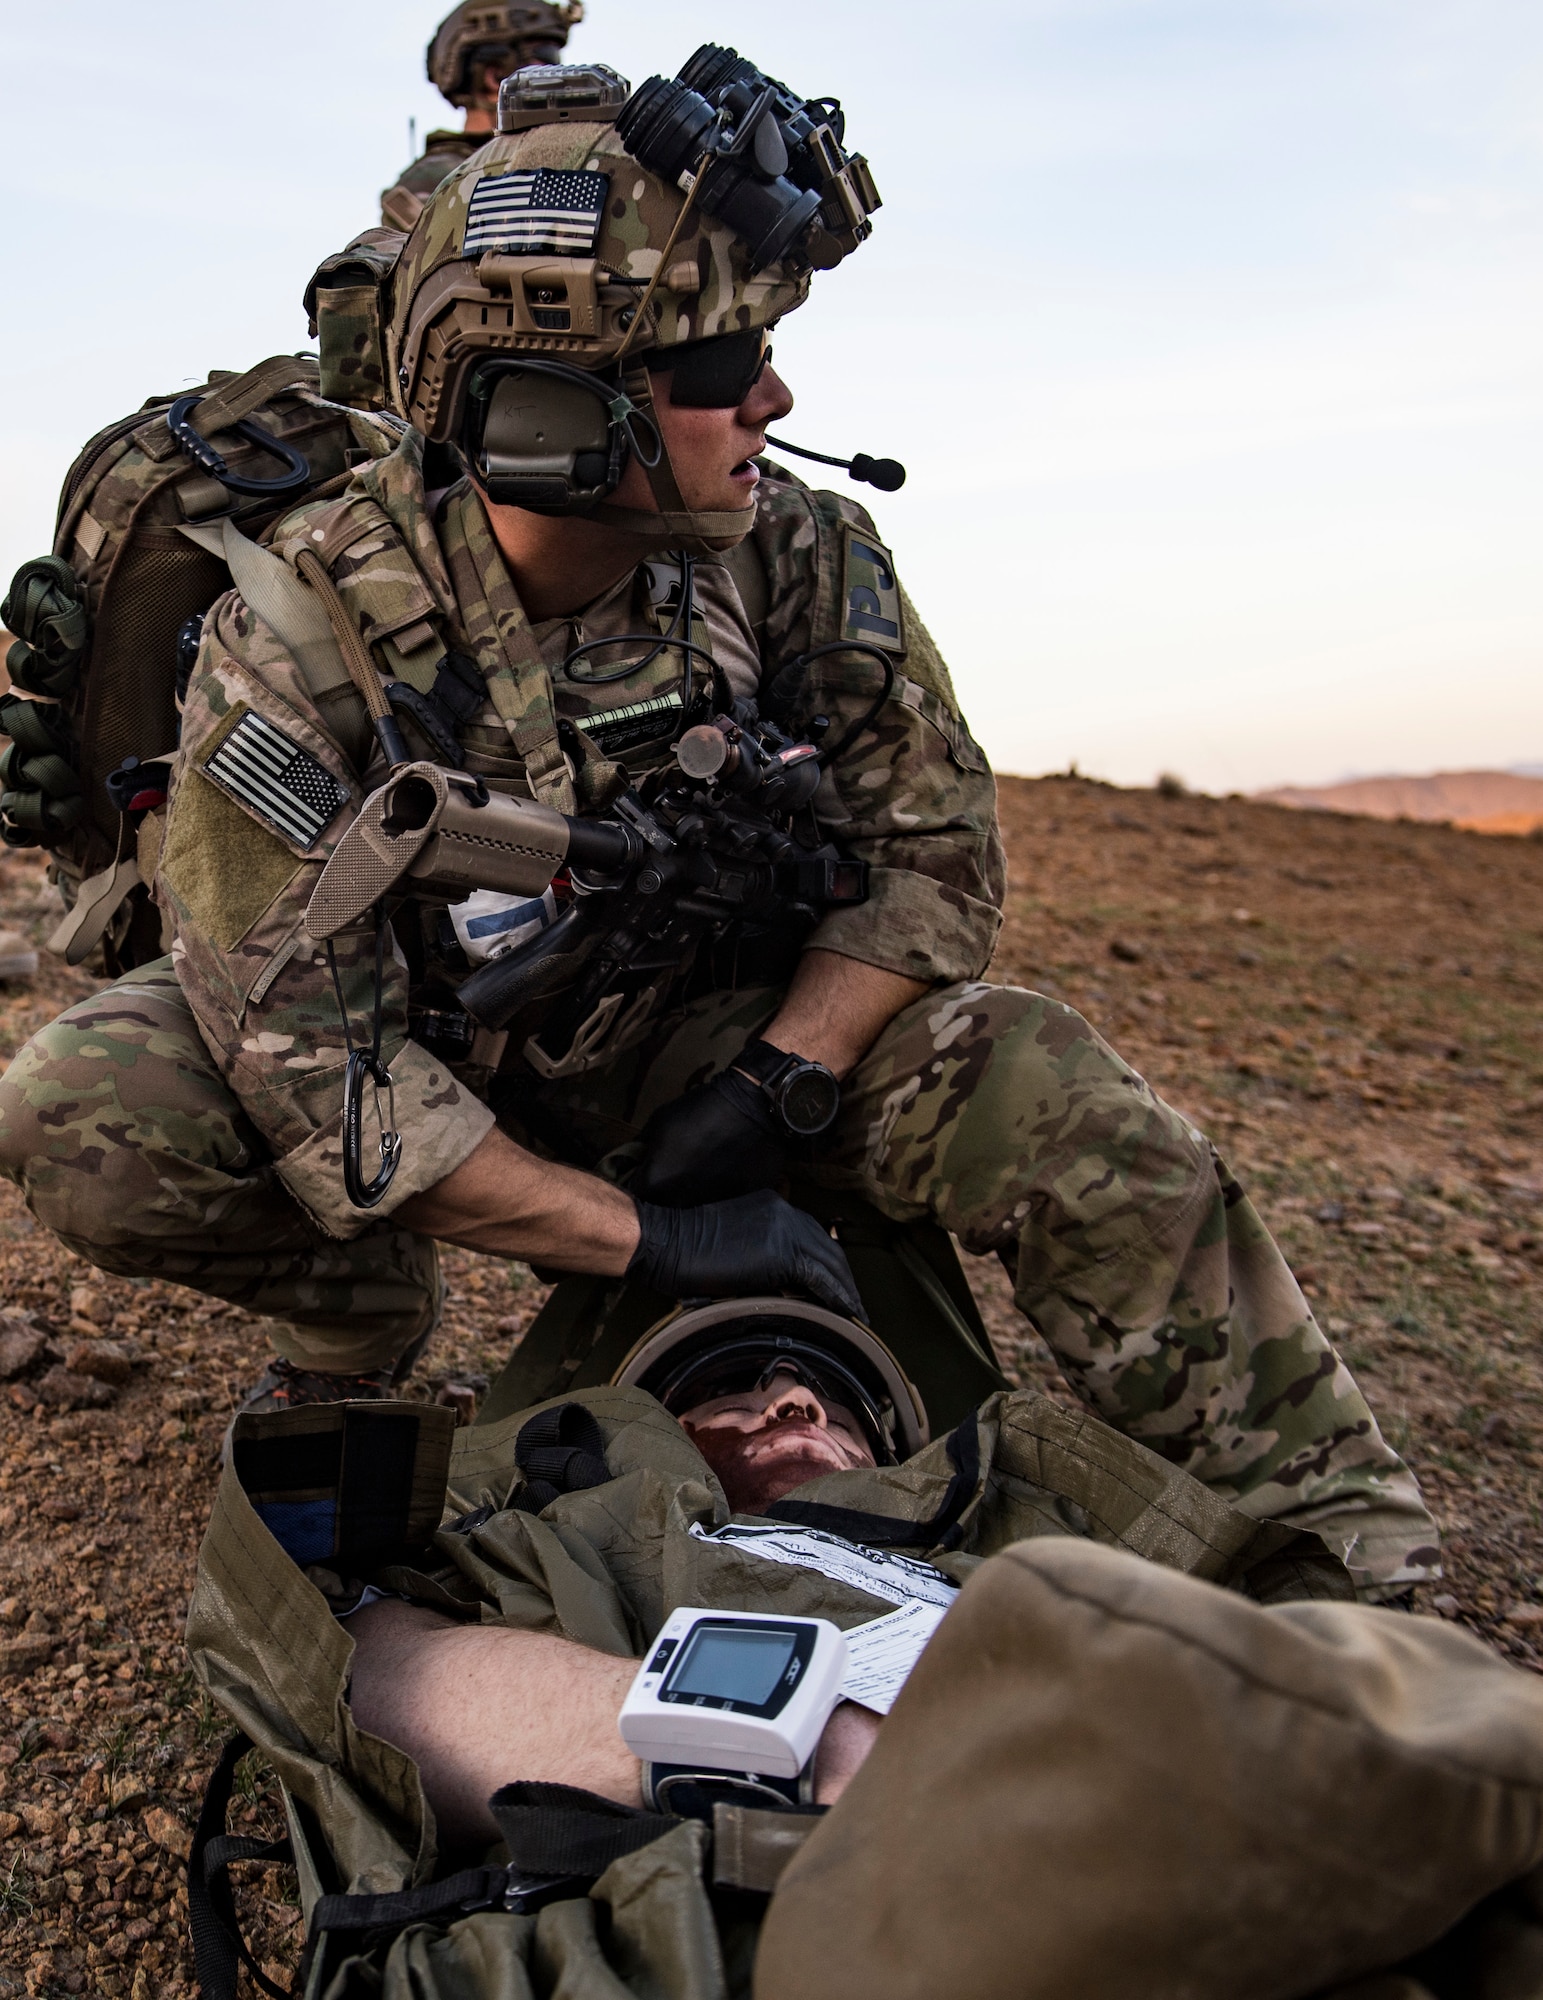 A U.S. Air Force pararescueman, assigned to the 83rd Expeditionary Rescue Squadron, prepares to move a simulated casualty during a personnel recovery exercise at an undisclosed location in Afghanistan, March 6, 2018.